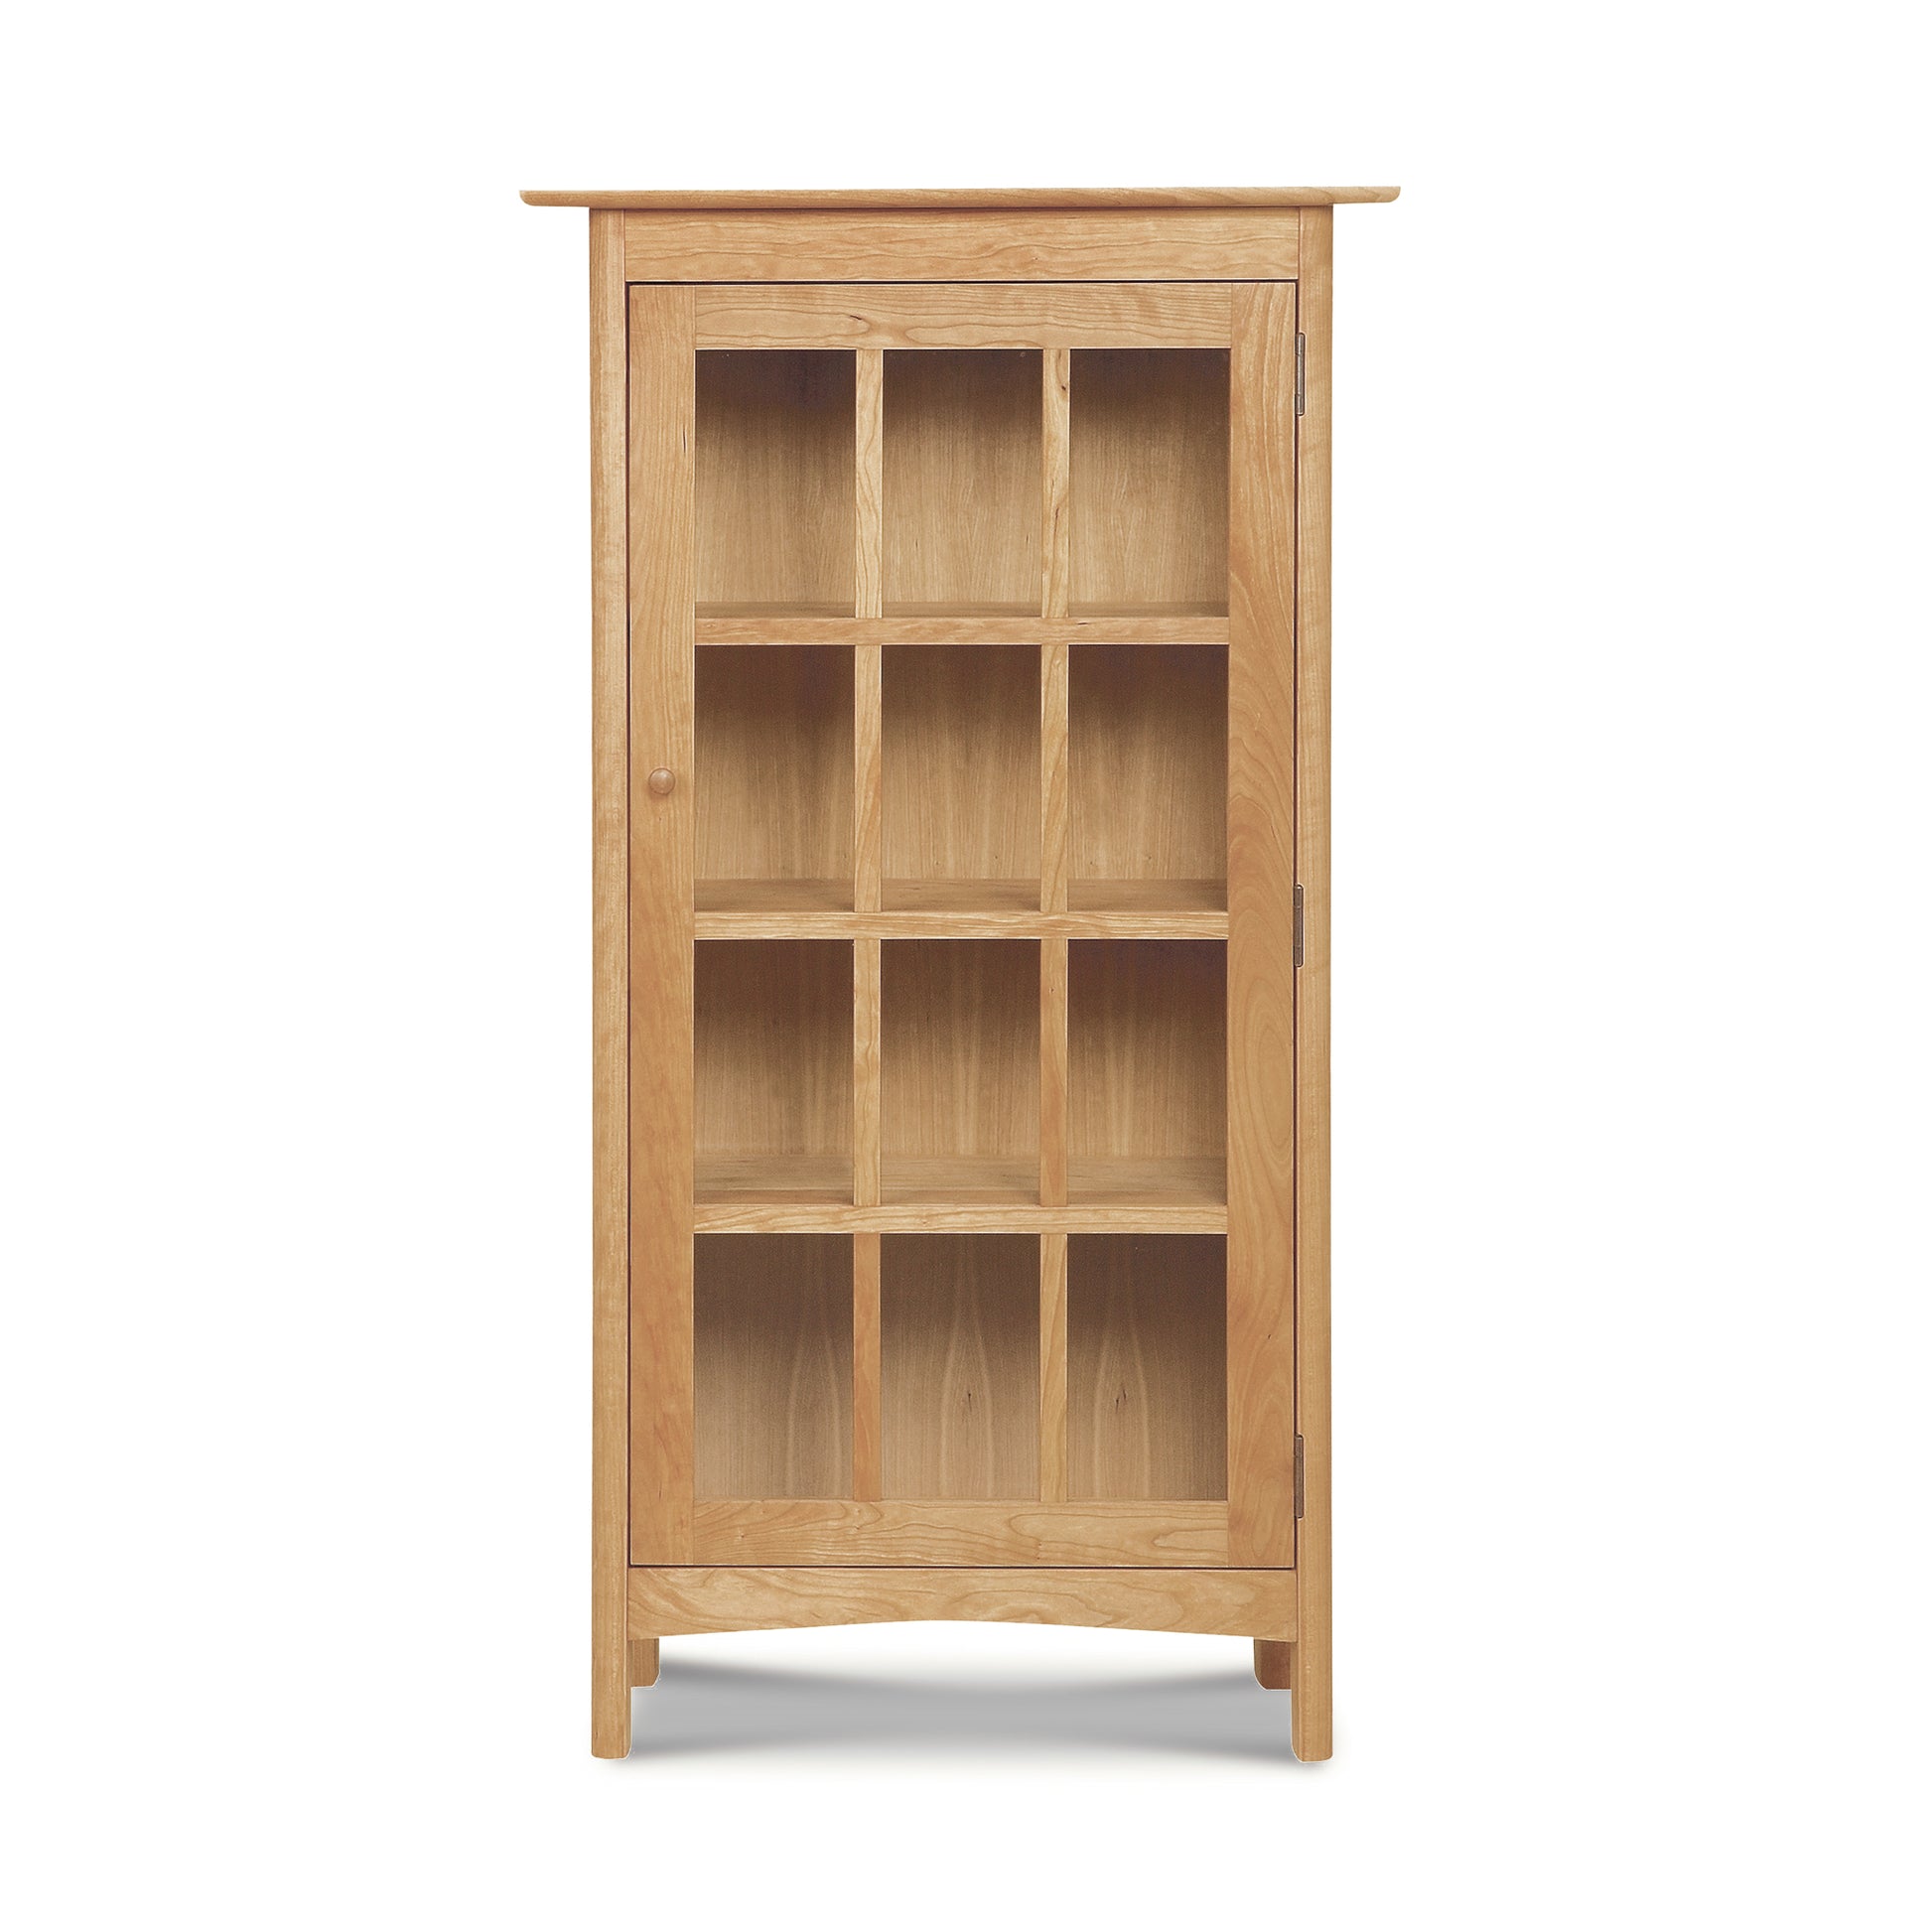 Empty Vermont Furniture Designs Heartwood Shaker Glass Door Bookcase with multiple compartments, isolated on a white background.